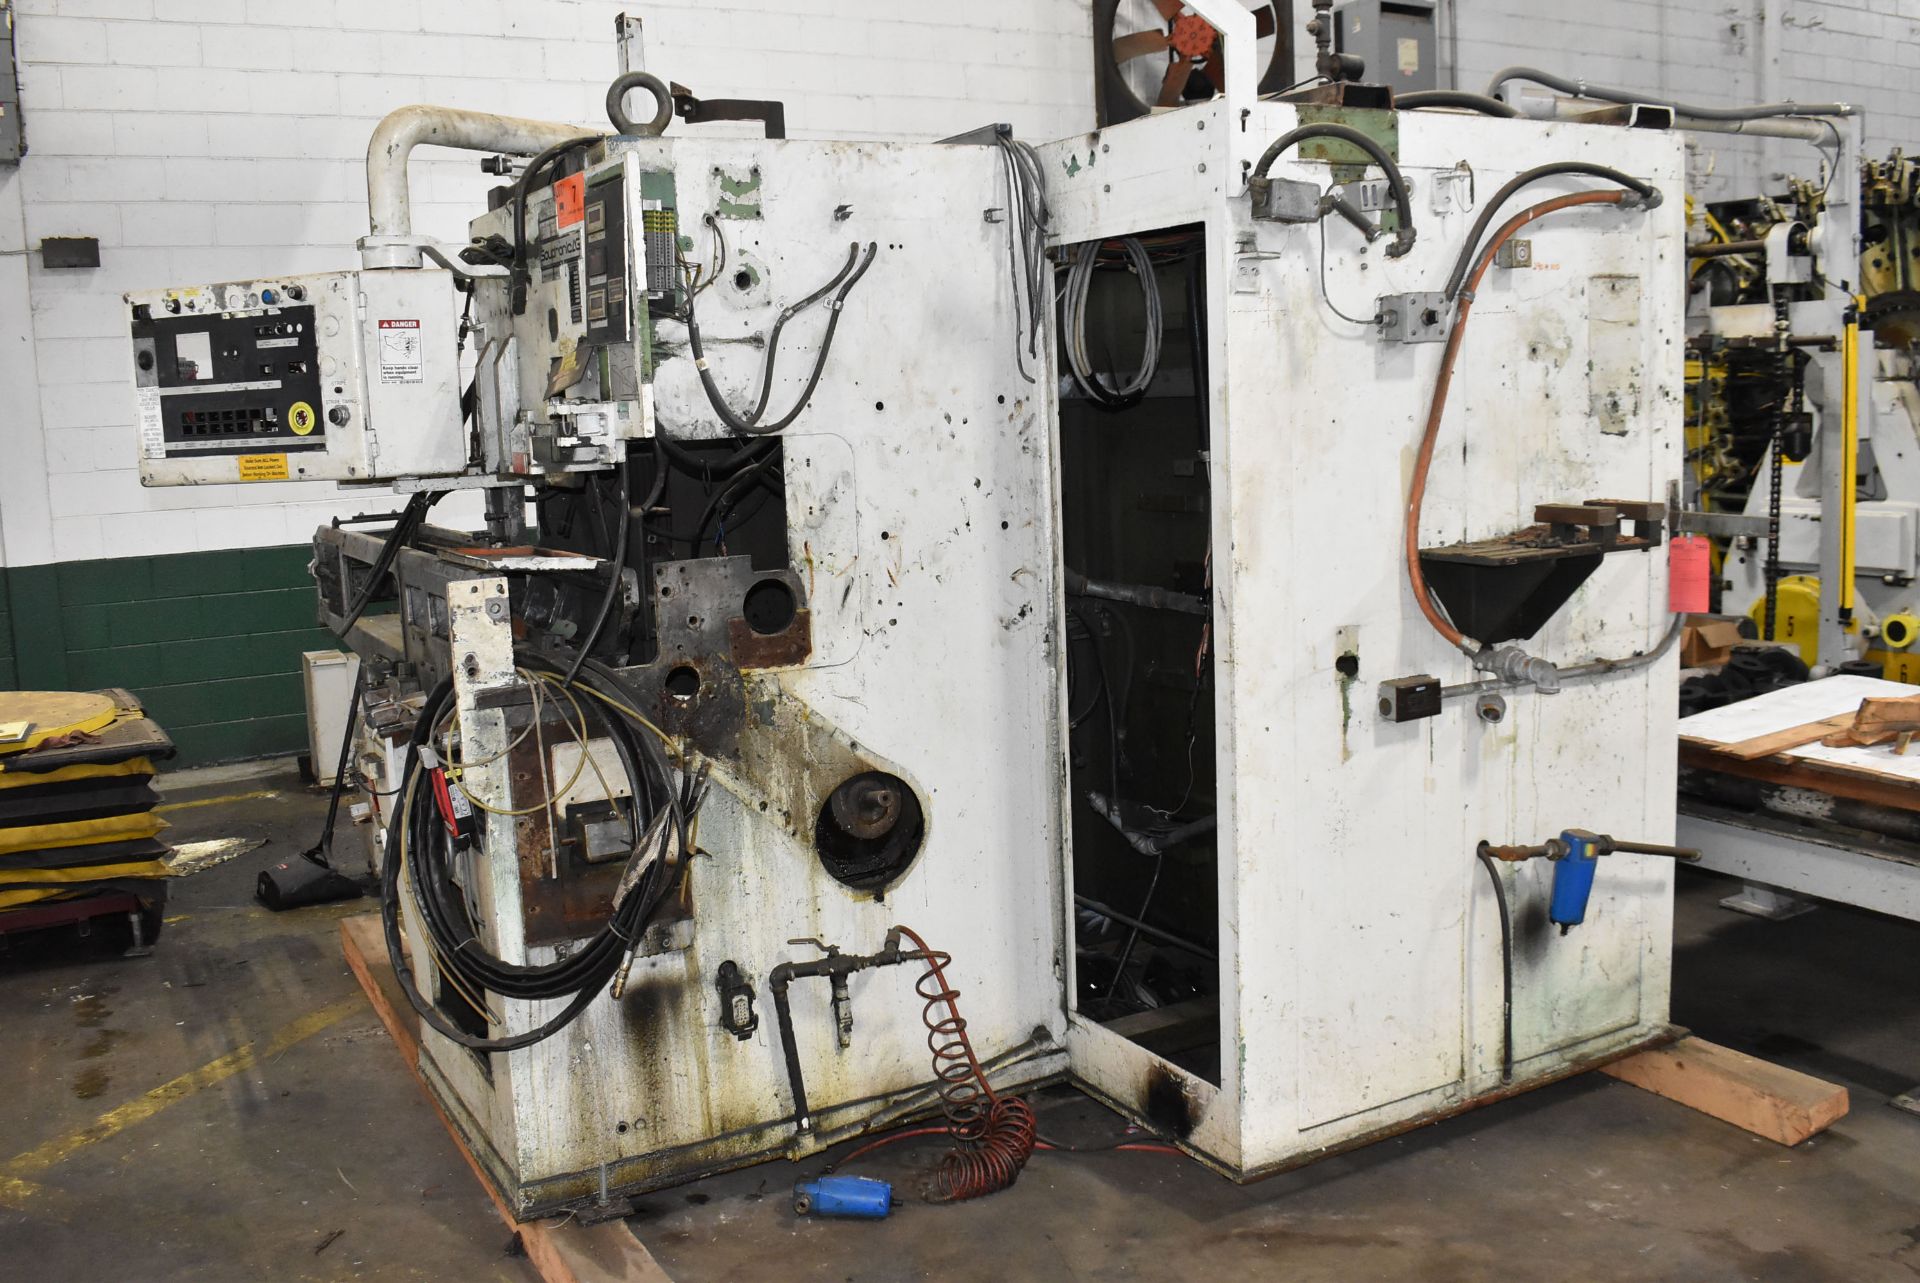 SOUDRONIC ABM 420 SW CAN BODY WELDER, S/N N/A (CI) (PARTS ONLY)(Located at 930 Beaumont Ave, - Image 9 of 13